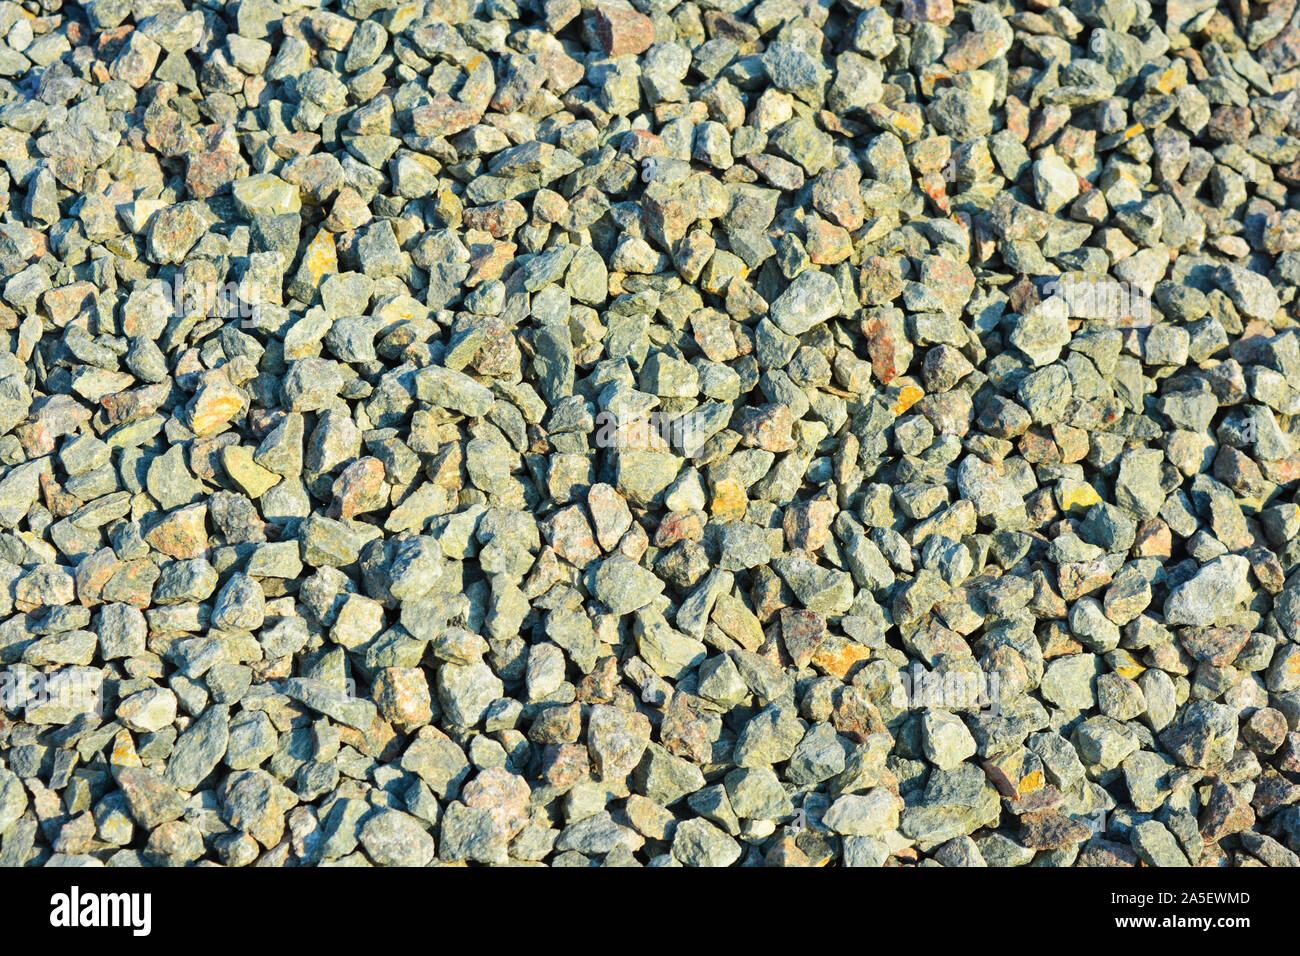 Building materials for construction and repair work, clean fine gravel rubble, a pile of building pebbles in the autumn sunlight. Stock Photo